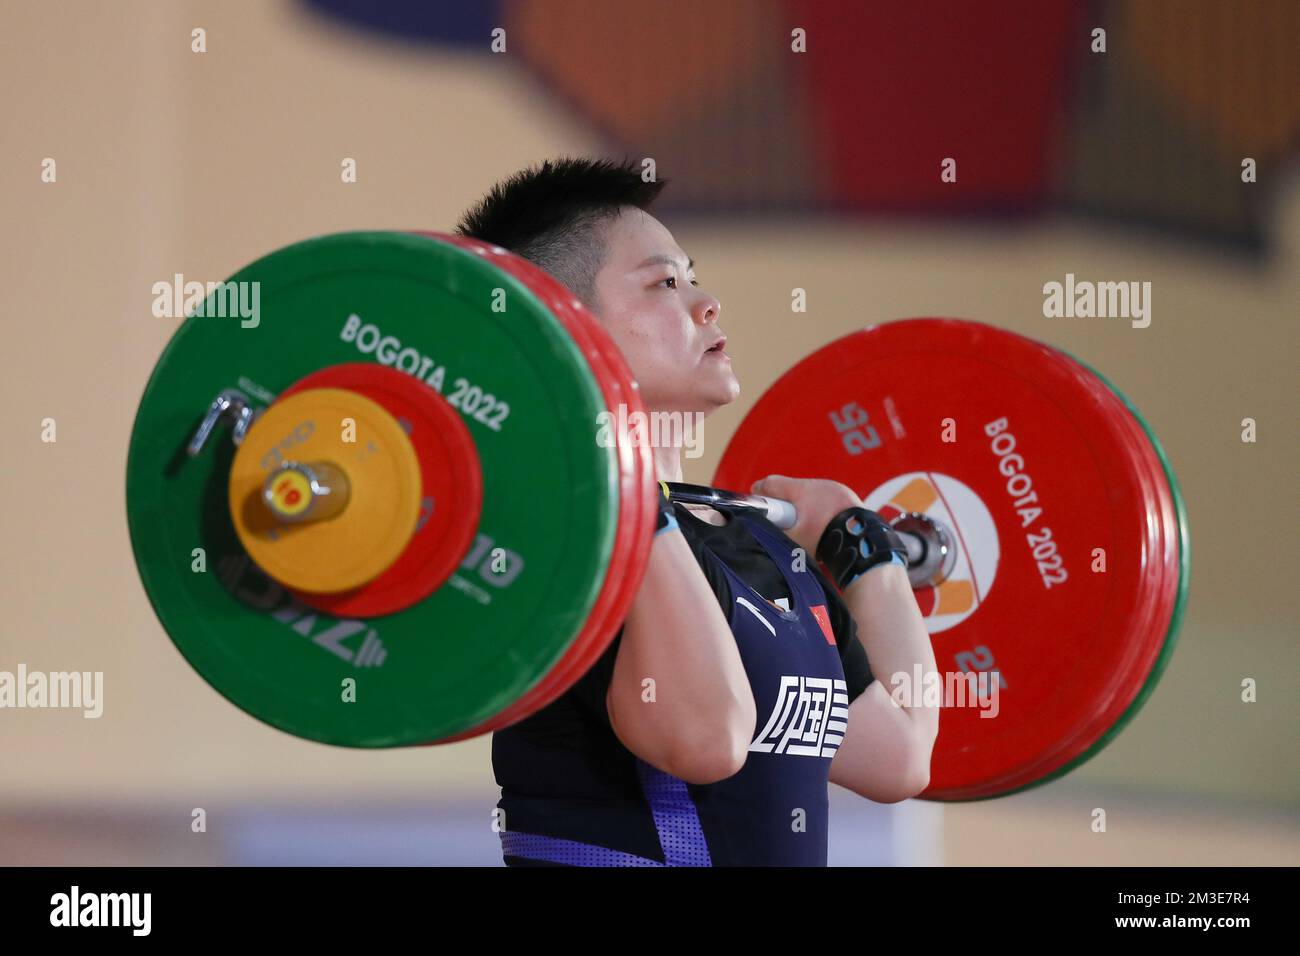 Bogota, Colombia. 14th Dec, 2022. Wang Zhouyu of China competes during the womens 81kg clean and jerk event at the 2022 World Weightlifting Championships held in Bogota, Colombia, Dec